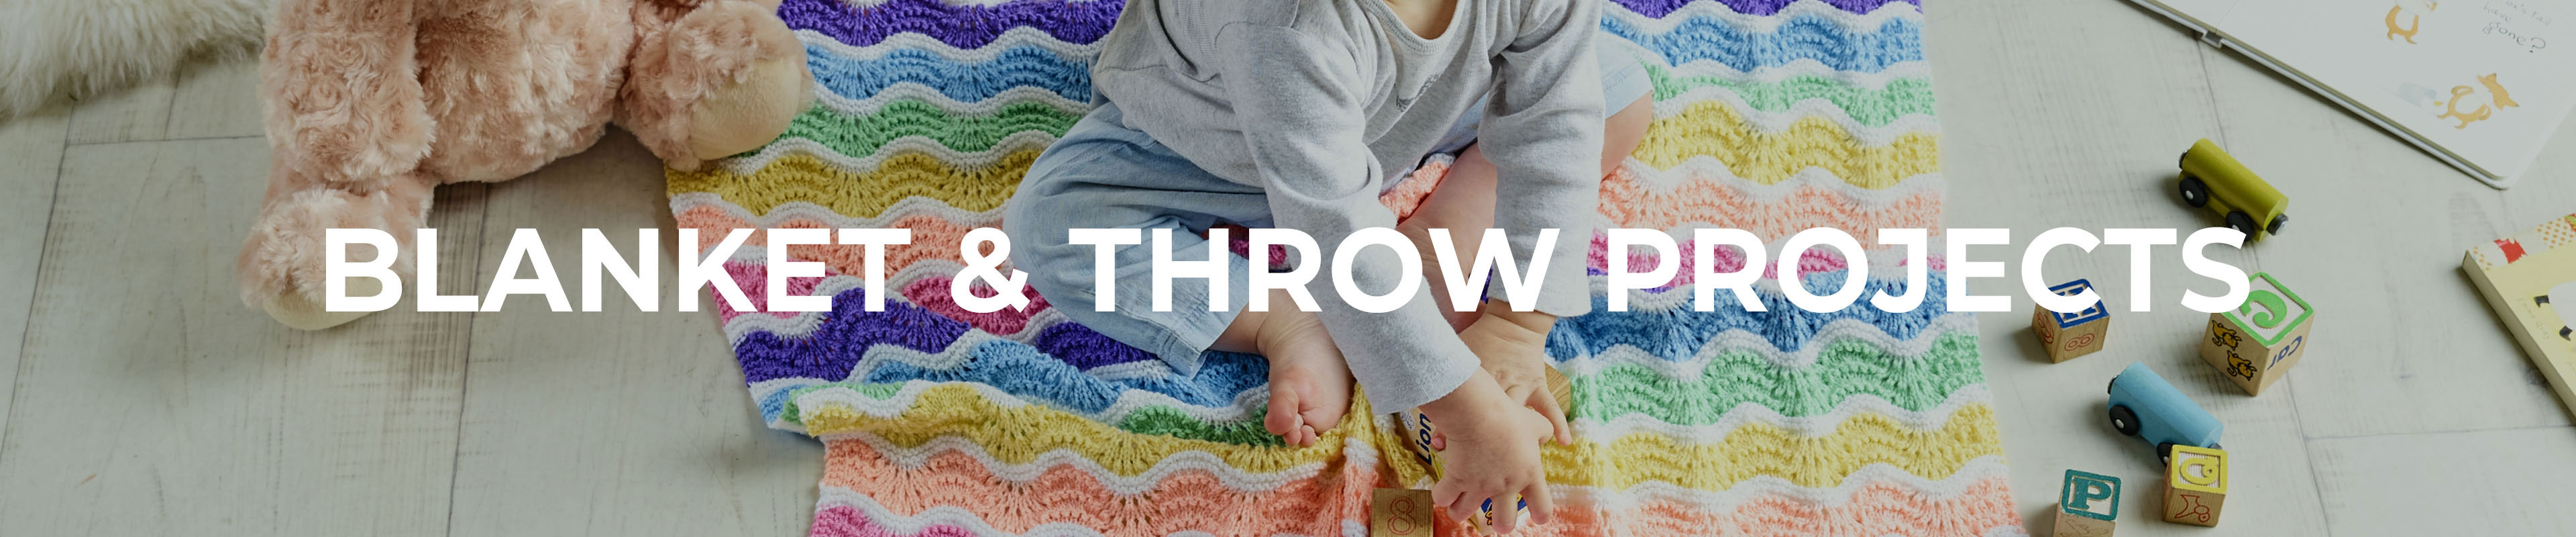 Blanket & Throw Projects